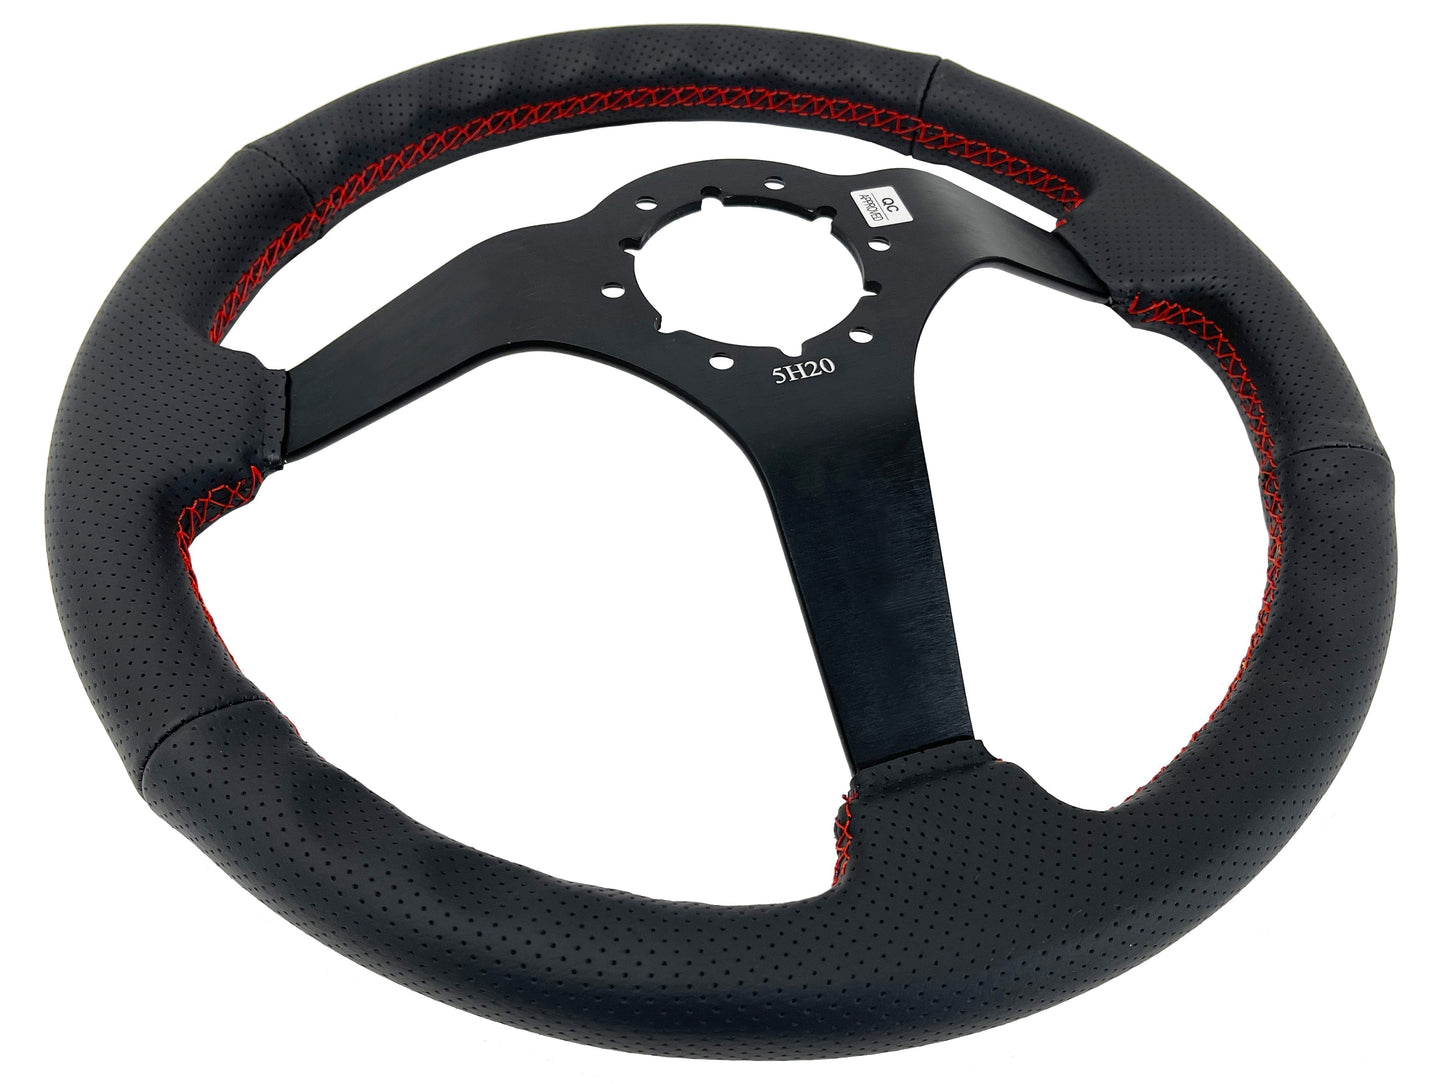 1997-04 Porsche Boxster (986 Manual) Steering Wheel Kit | Perforated Black Leather | ST3602RED